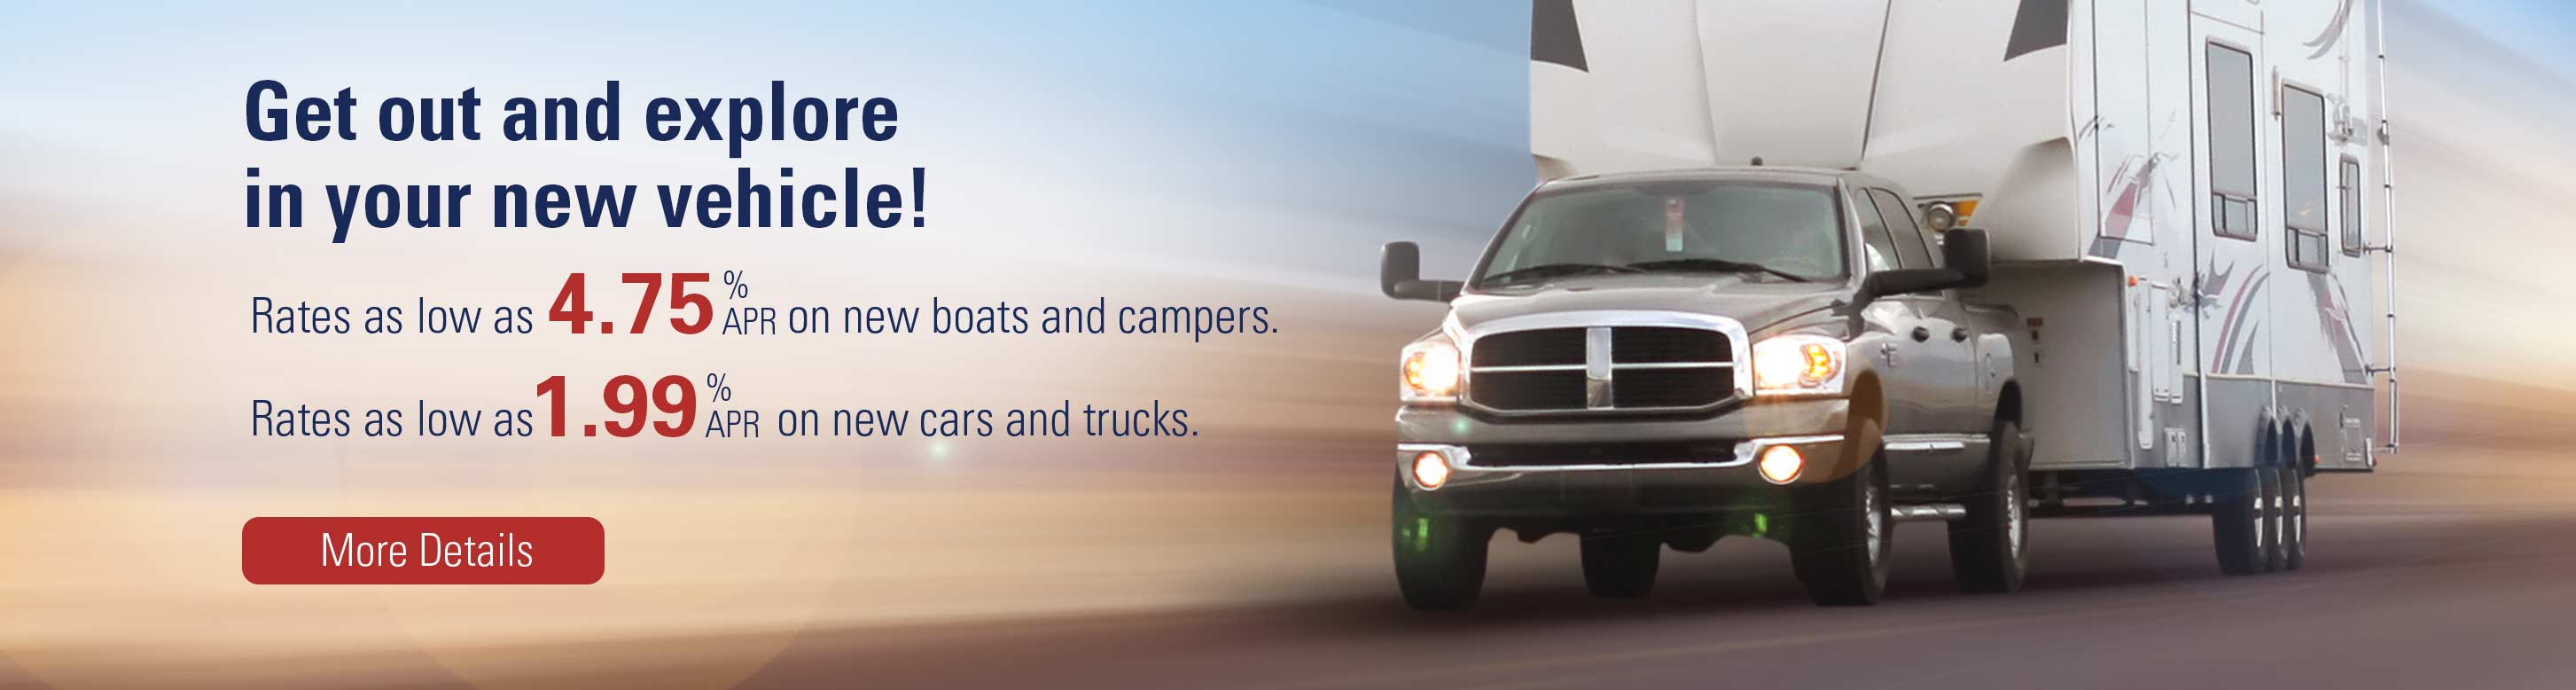 Get out and explore in your new vehicle! Rates as low as 3.90% apr on new boats and campers. Rates as low as 1.99% apr on new cars and trucks. More Details.